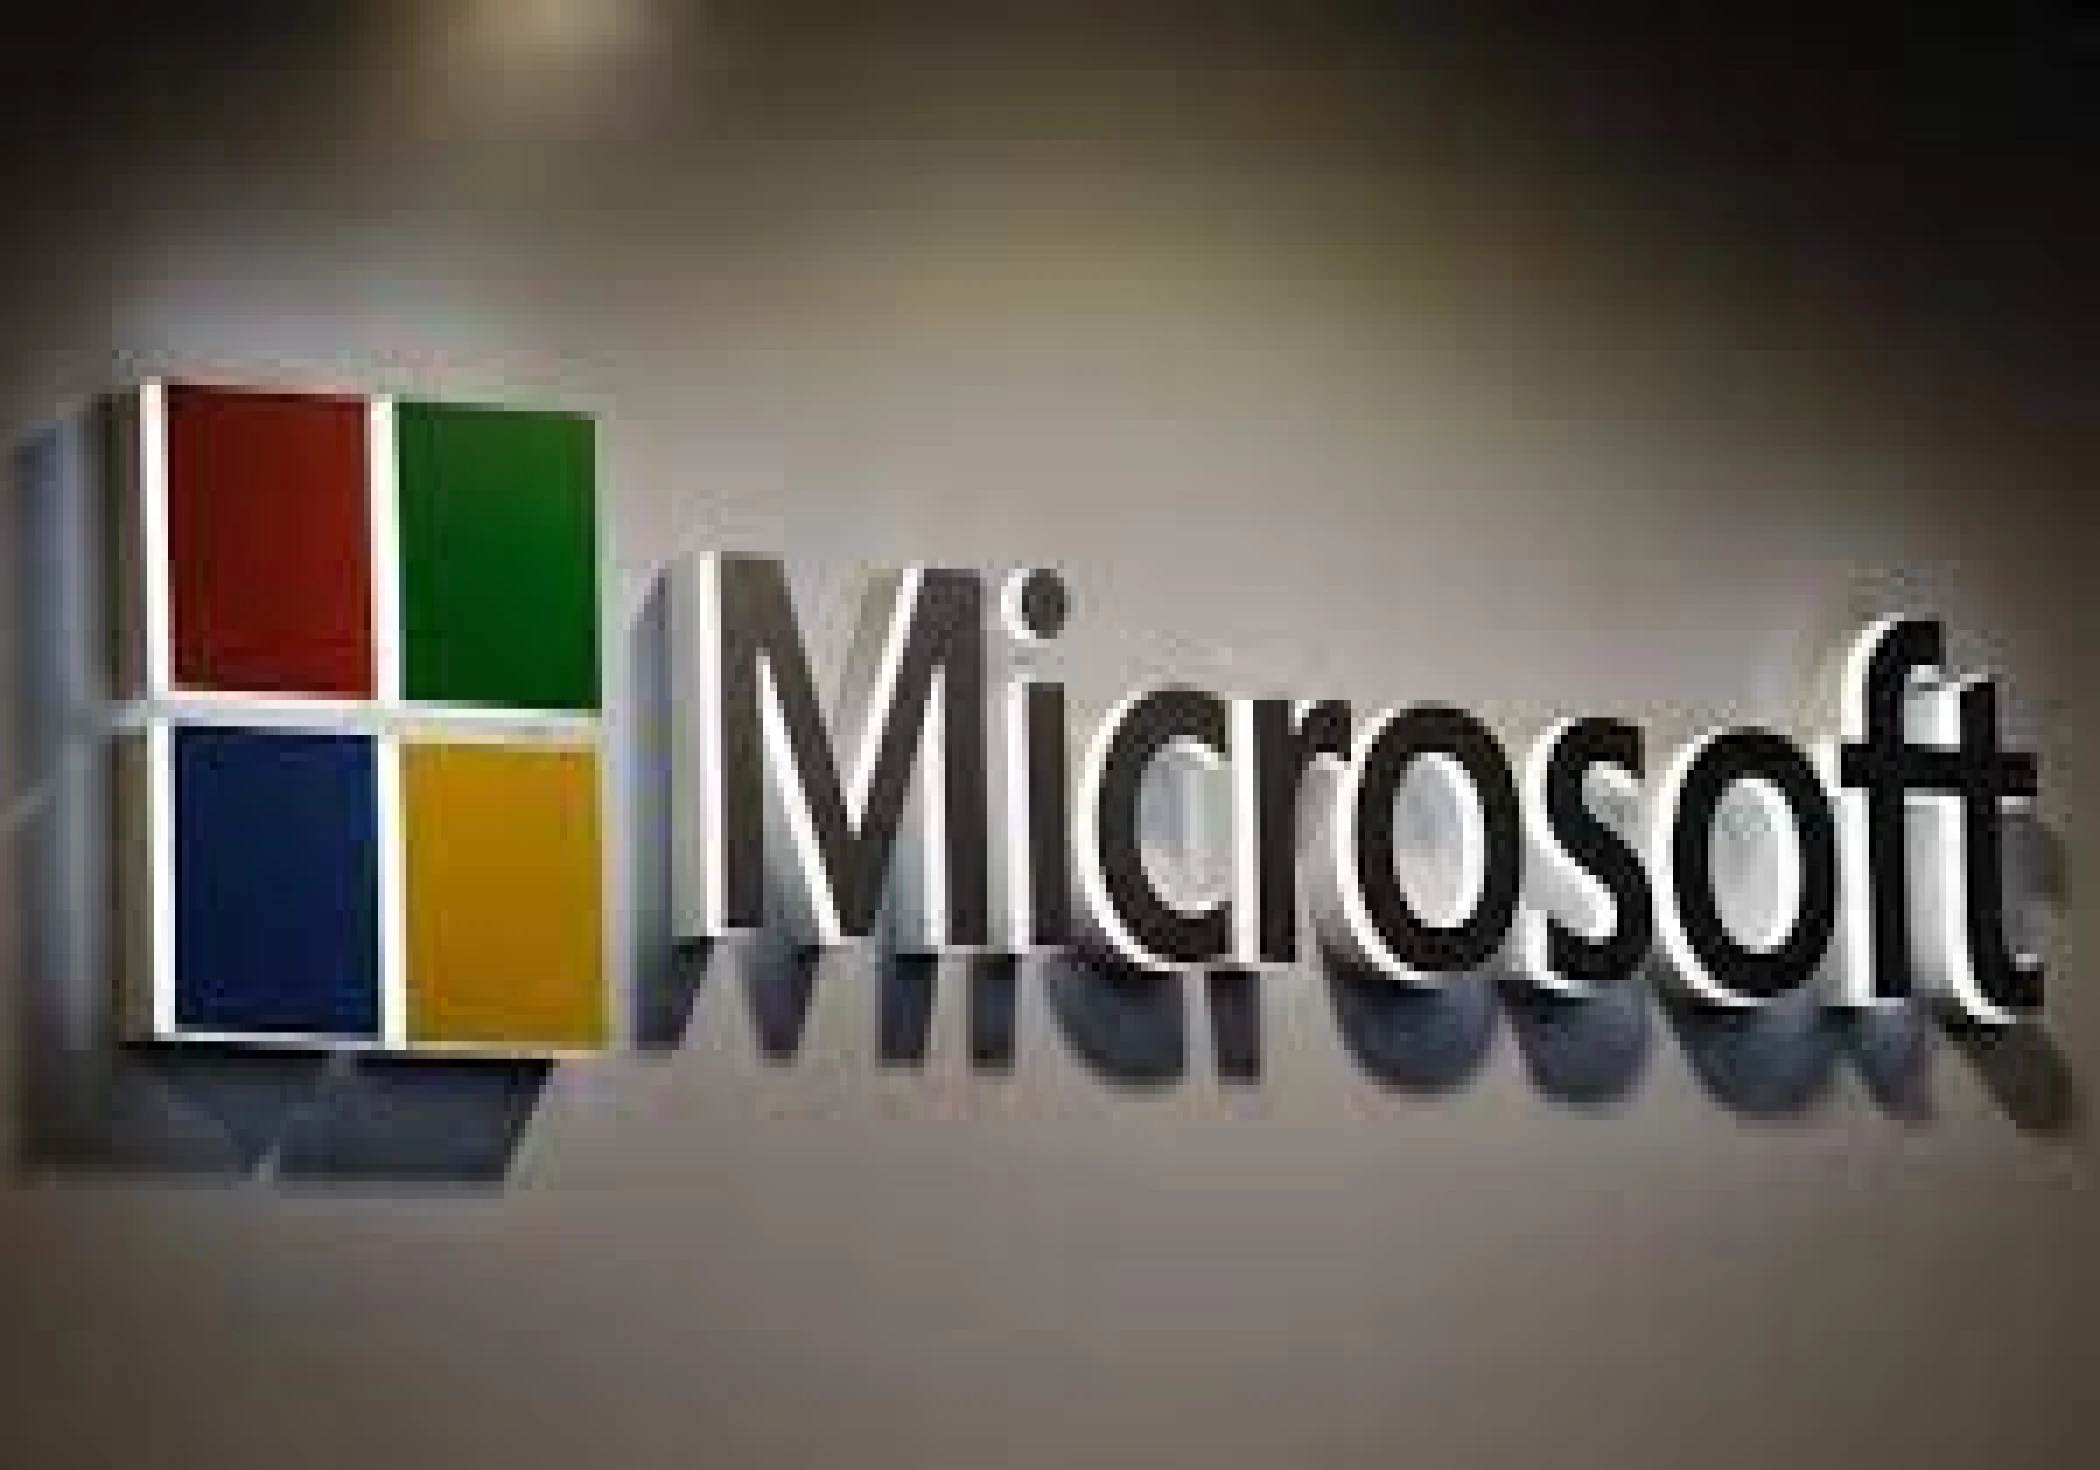 Microsoft: Source Code Breach by Russian Hackers Raises Security Concerns